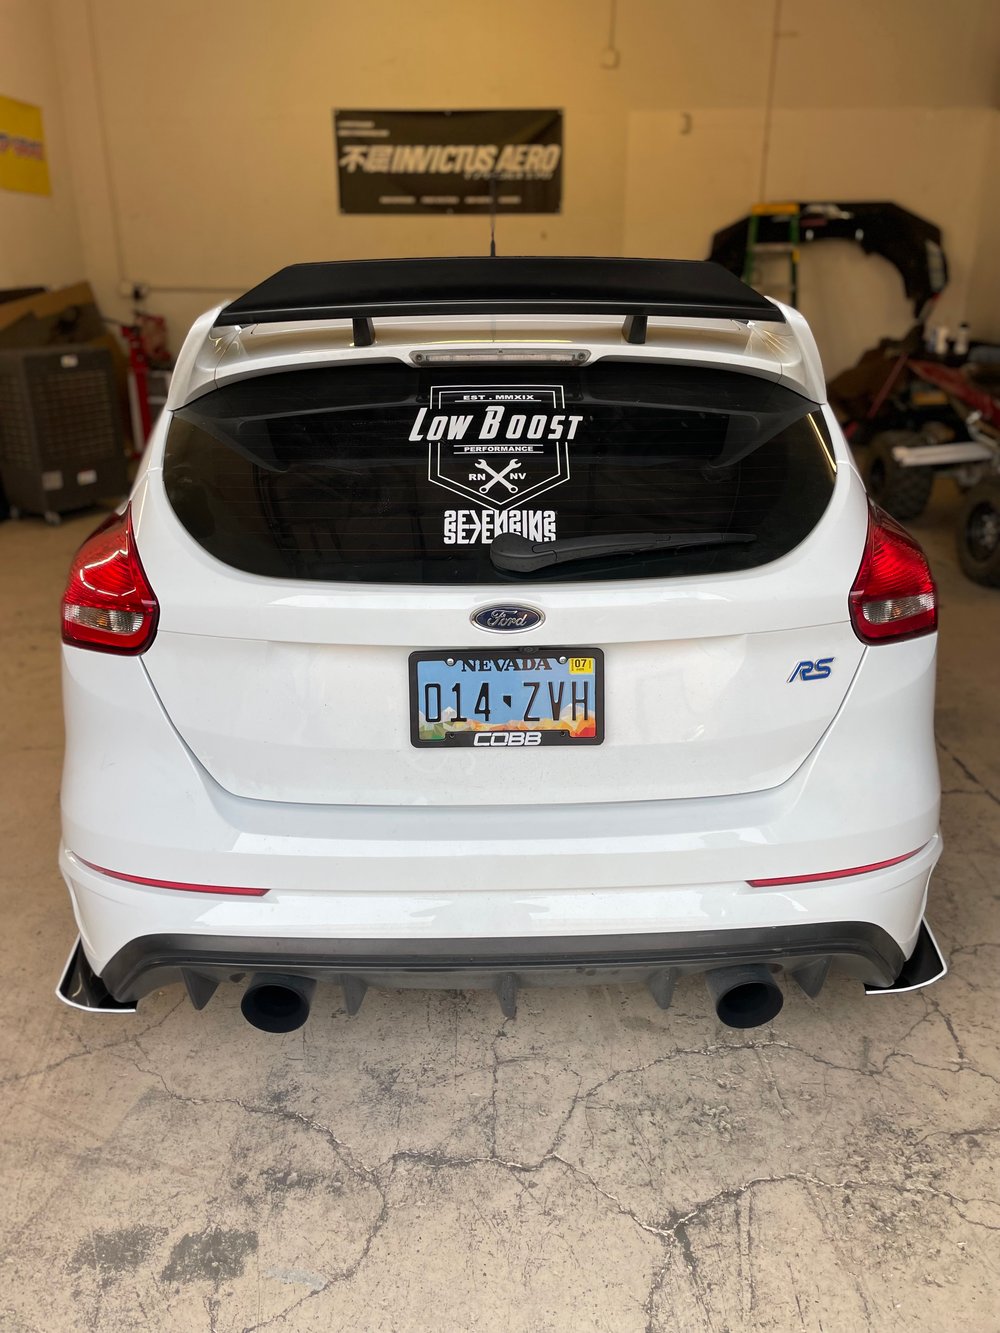 Image of Focus RS Rear Spats 